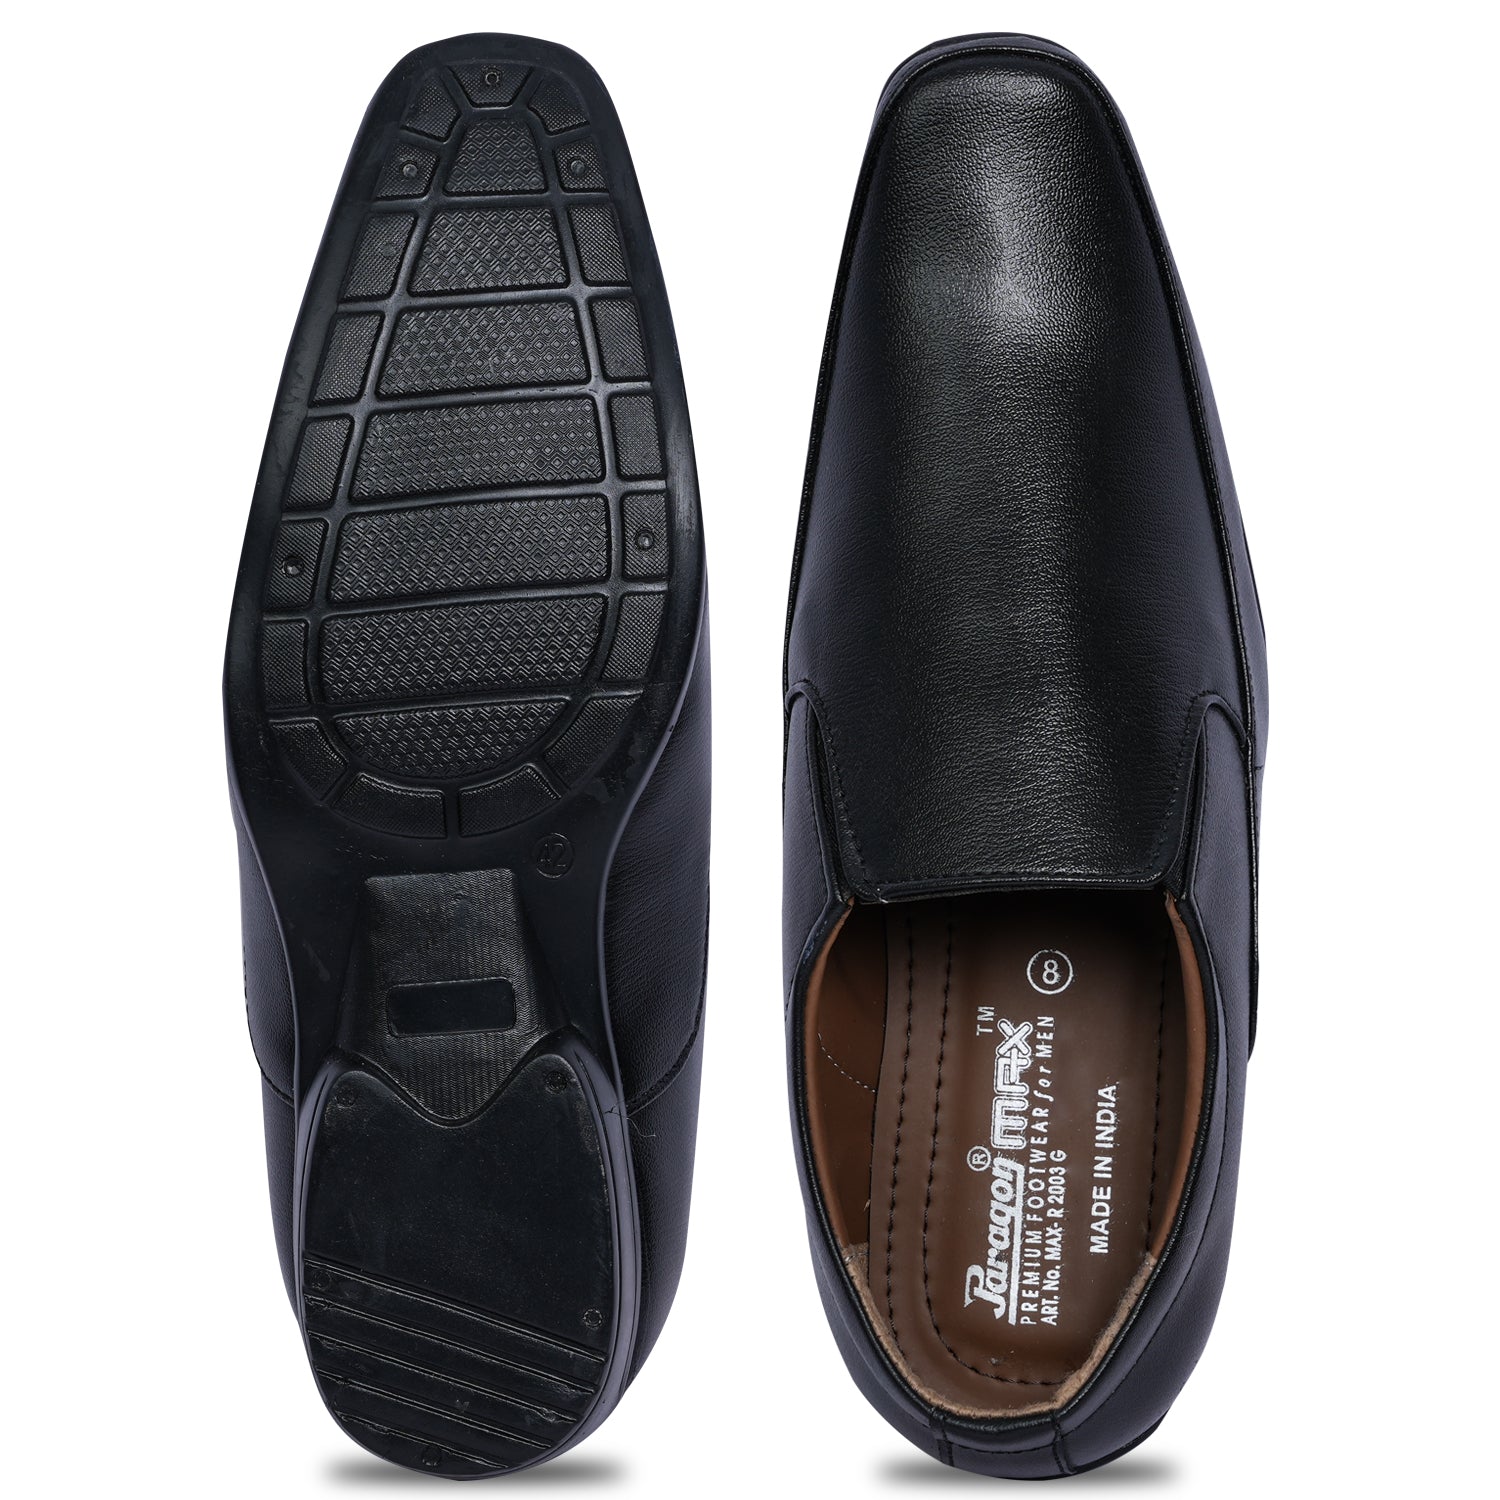 Paragon R2003G Men Formal Shoes | Corporate Office Shoes | Smart &amp; Sleek Design | Comfortable Sole with Cushioning | Daily &amp; Occasion Wear